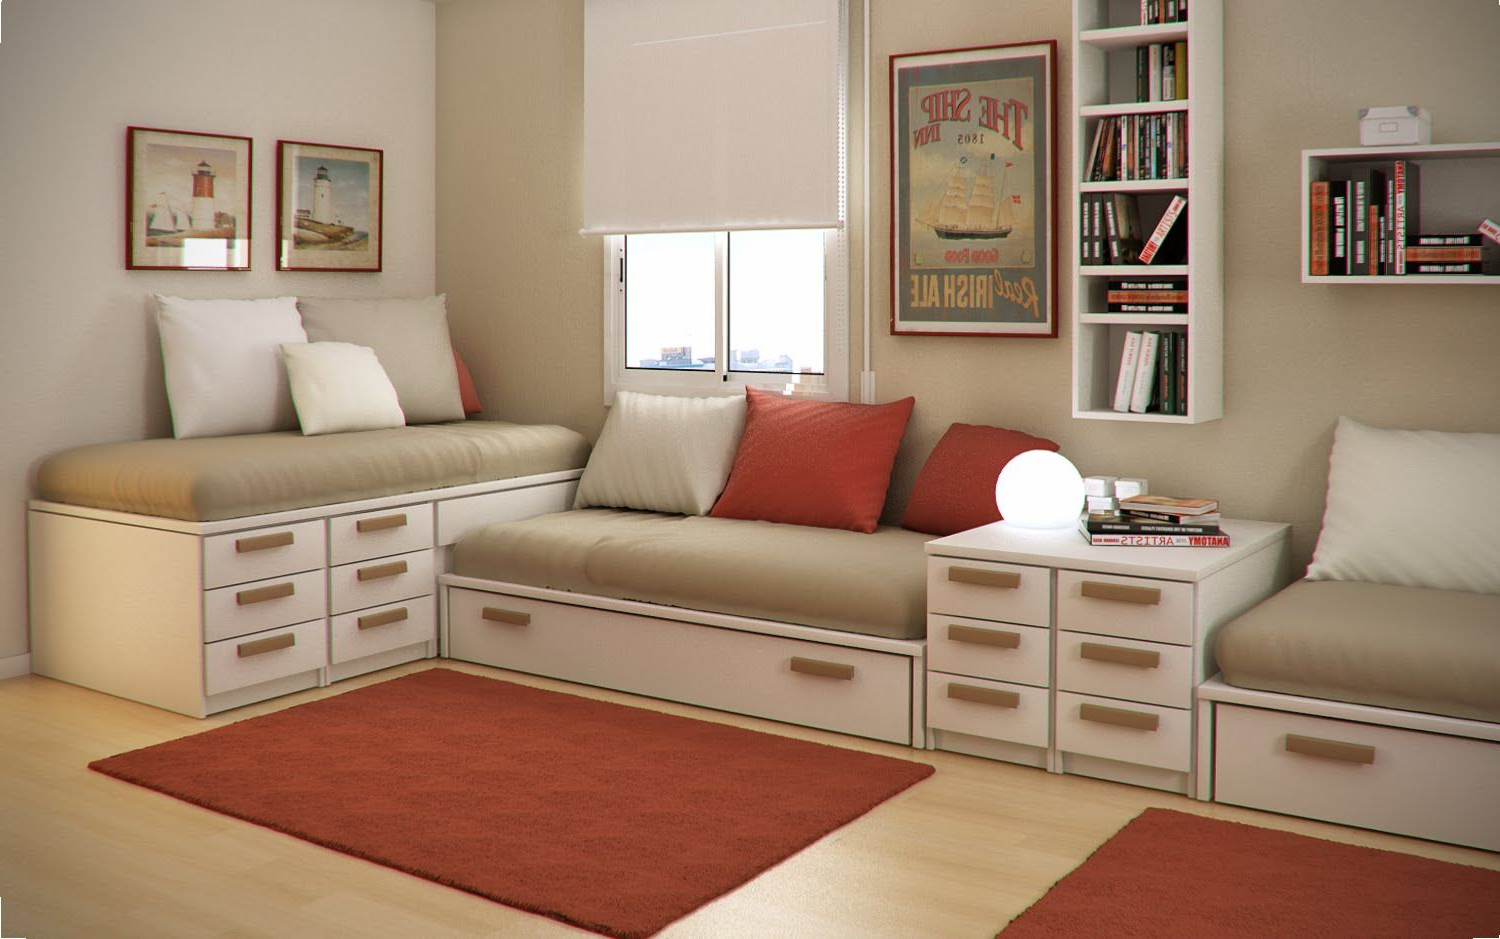 5 Tips To Organize Small Bedroom Minimalist Home